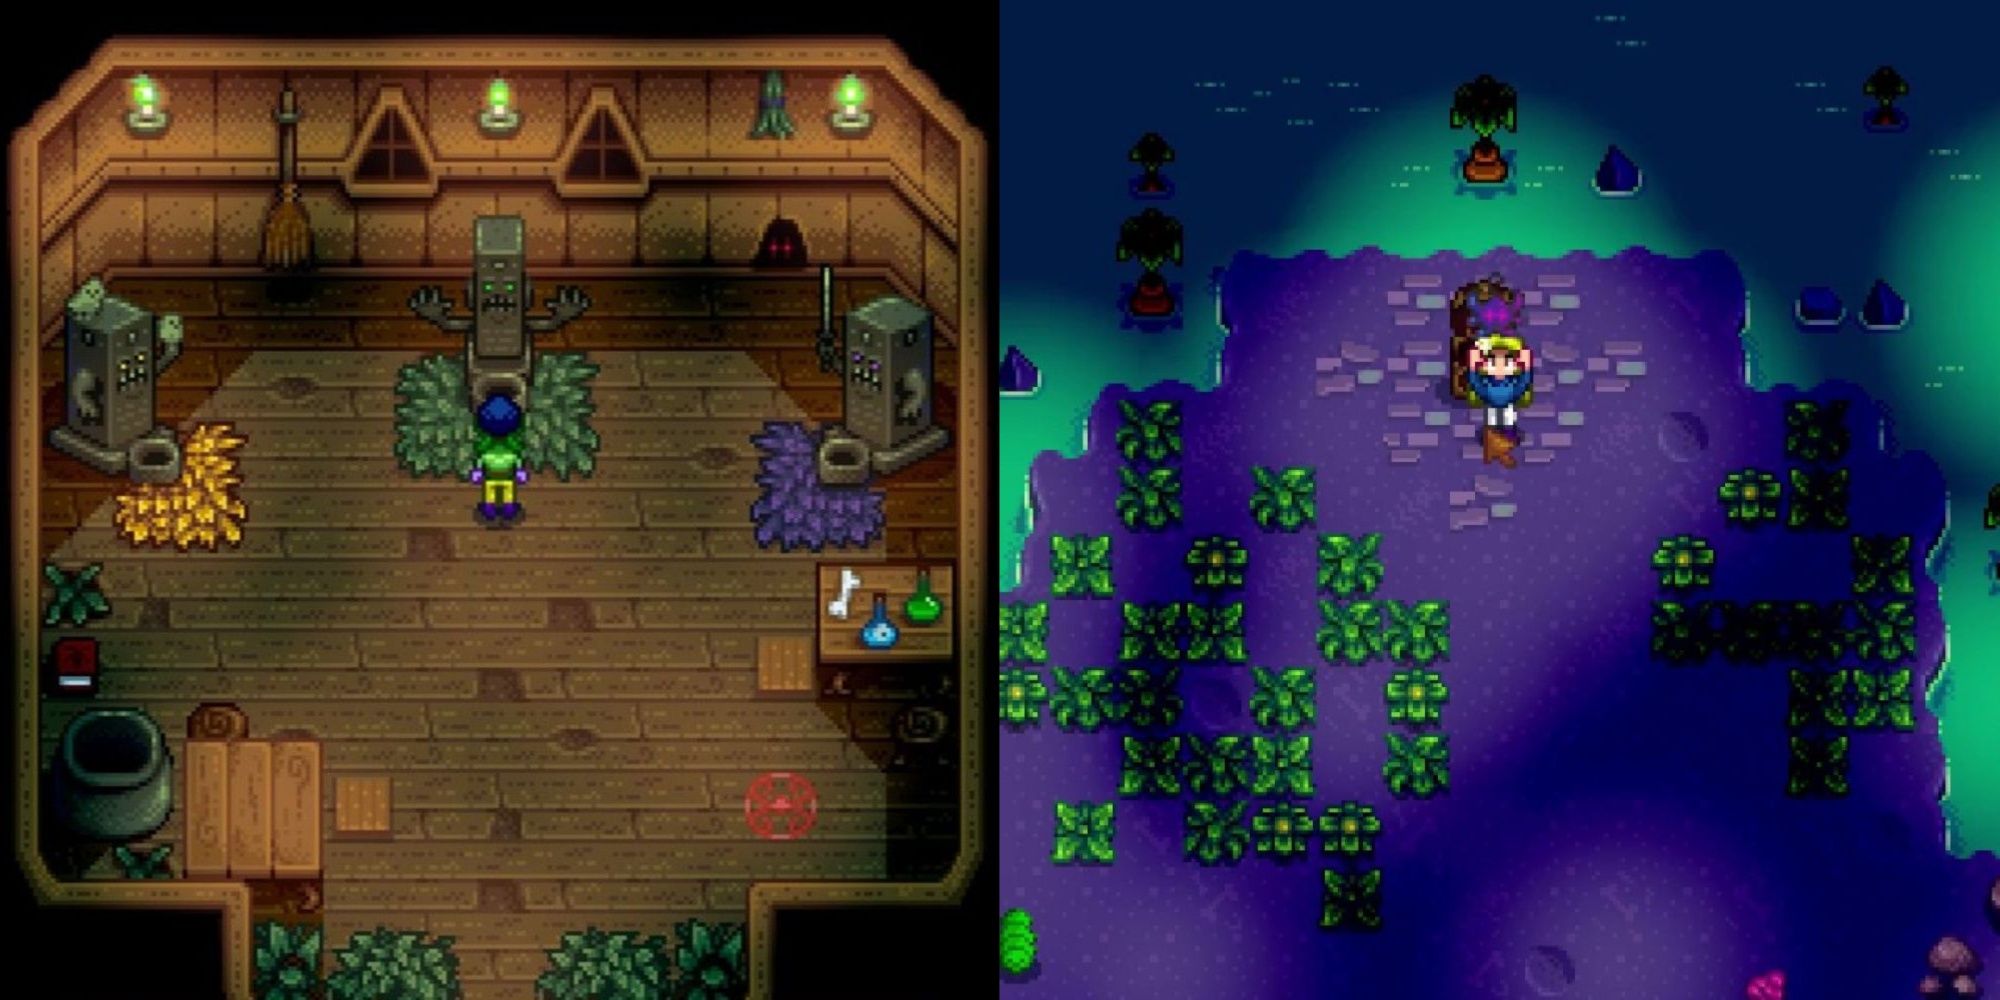 Split image of a player in the Dark Shrines and in the Sewers in Stardew Valley.